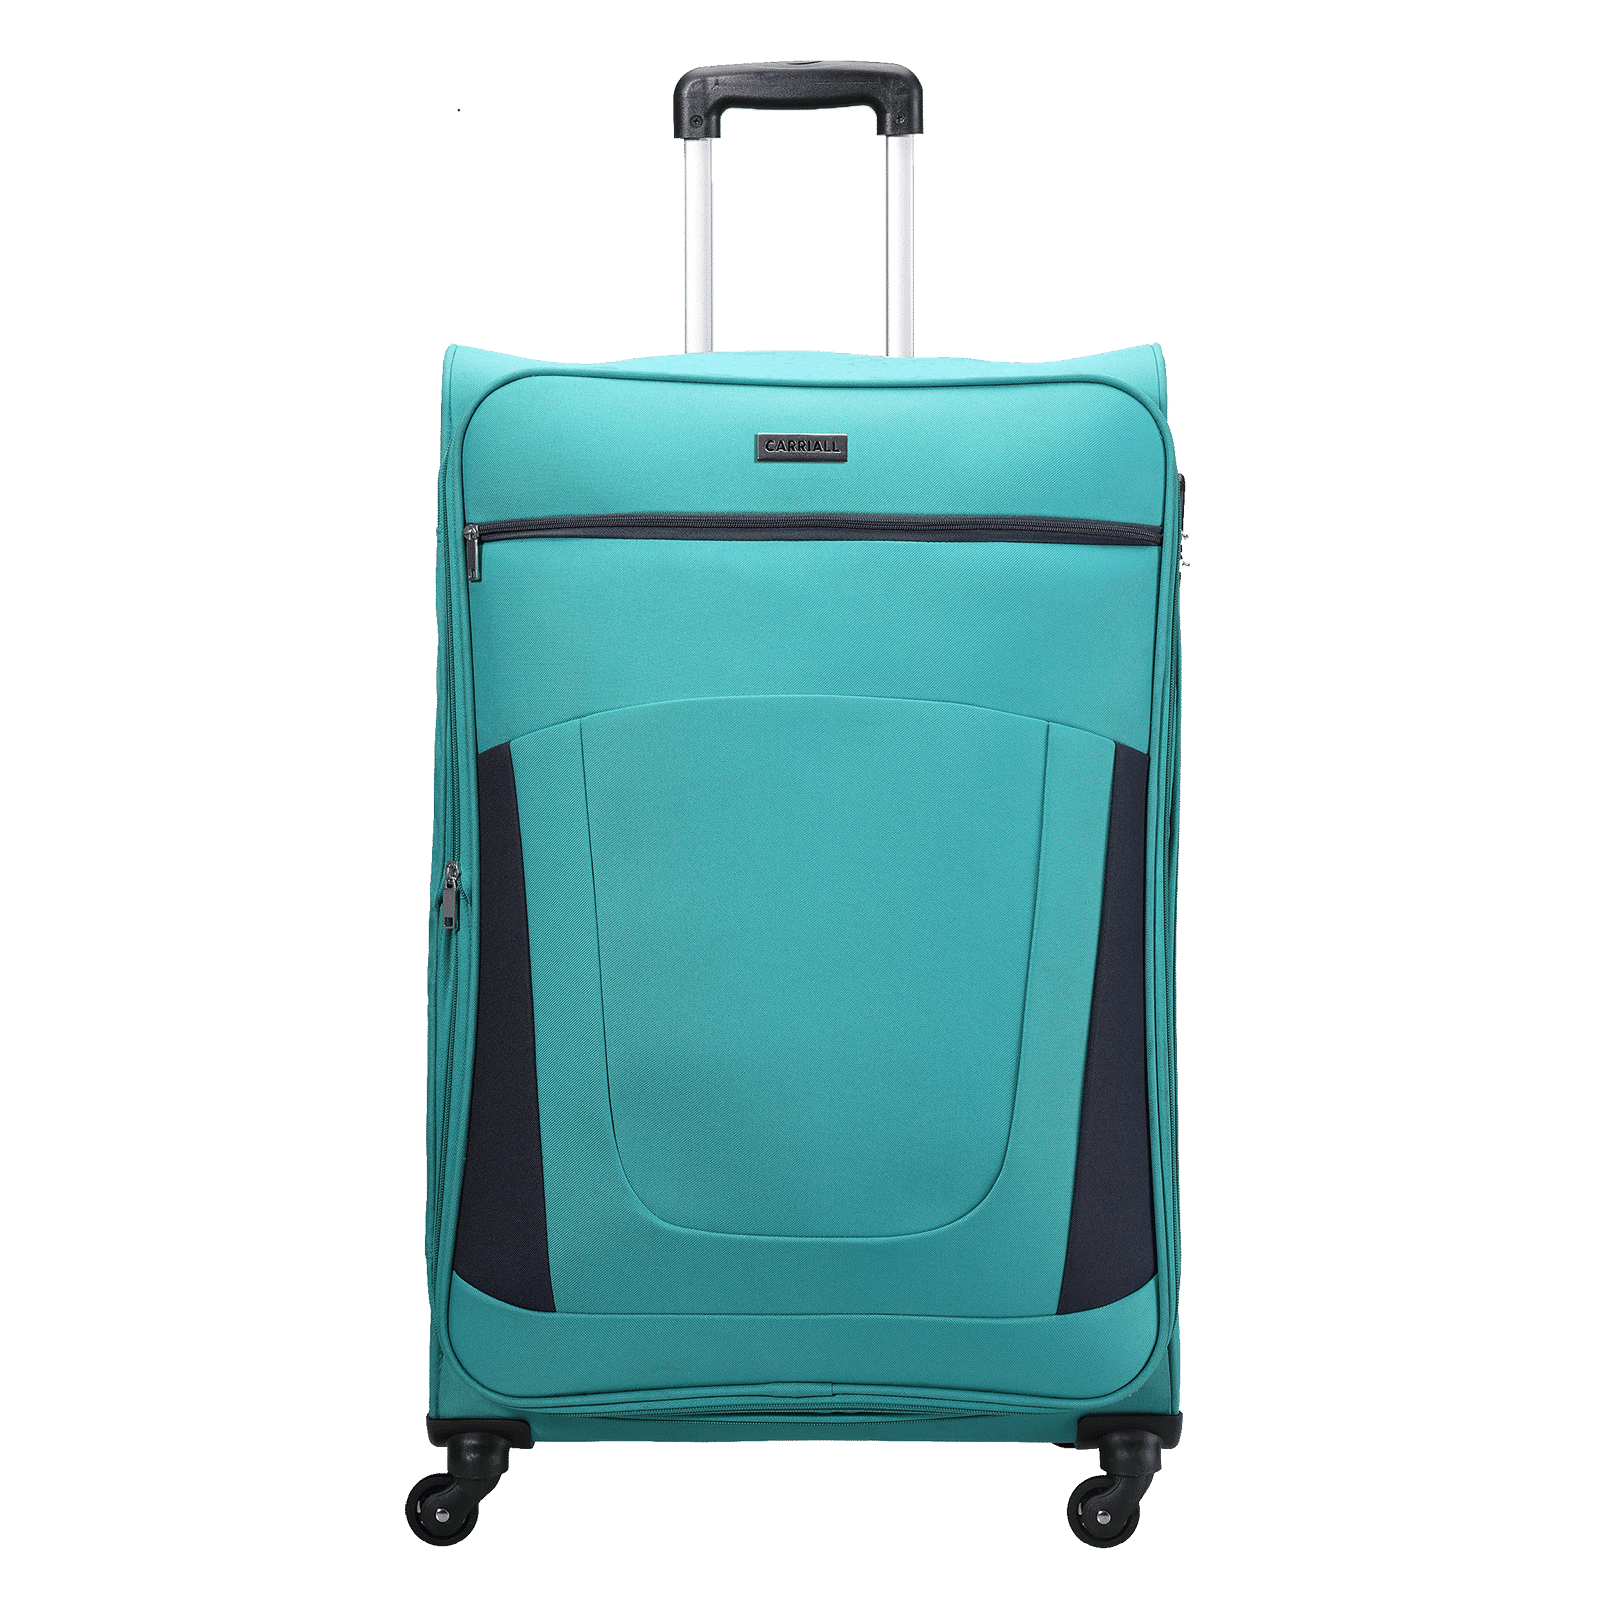 Amazon.in: CARRIALL: Smart Luggage